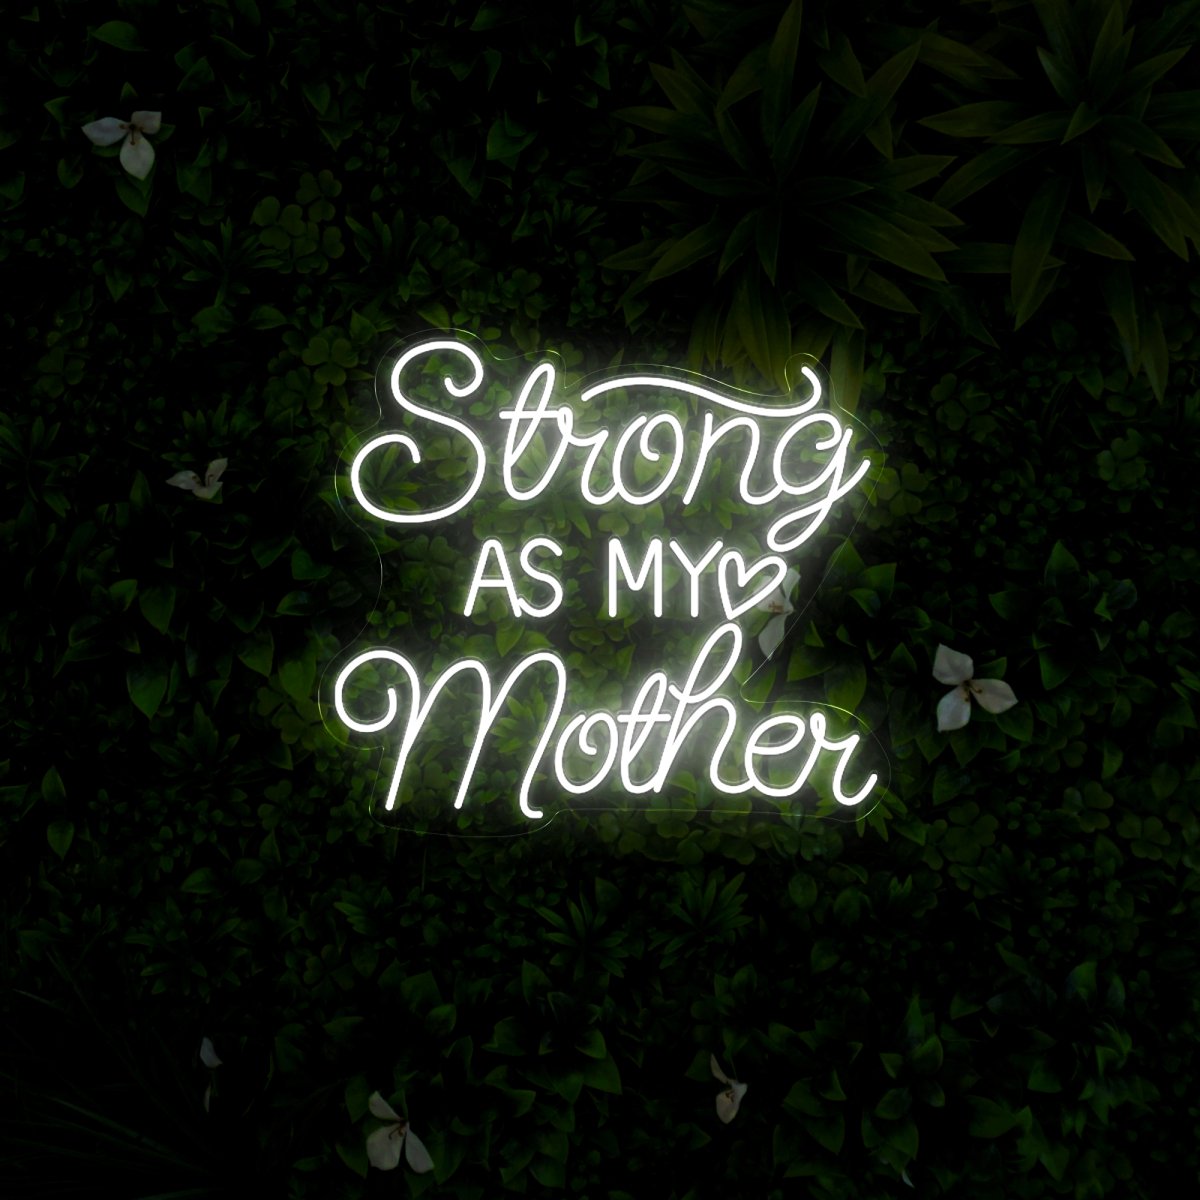 Strong As My Mother Neon Sign - Reels Custom